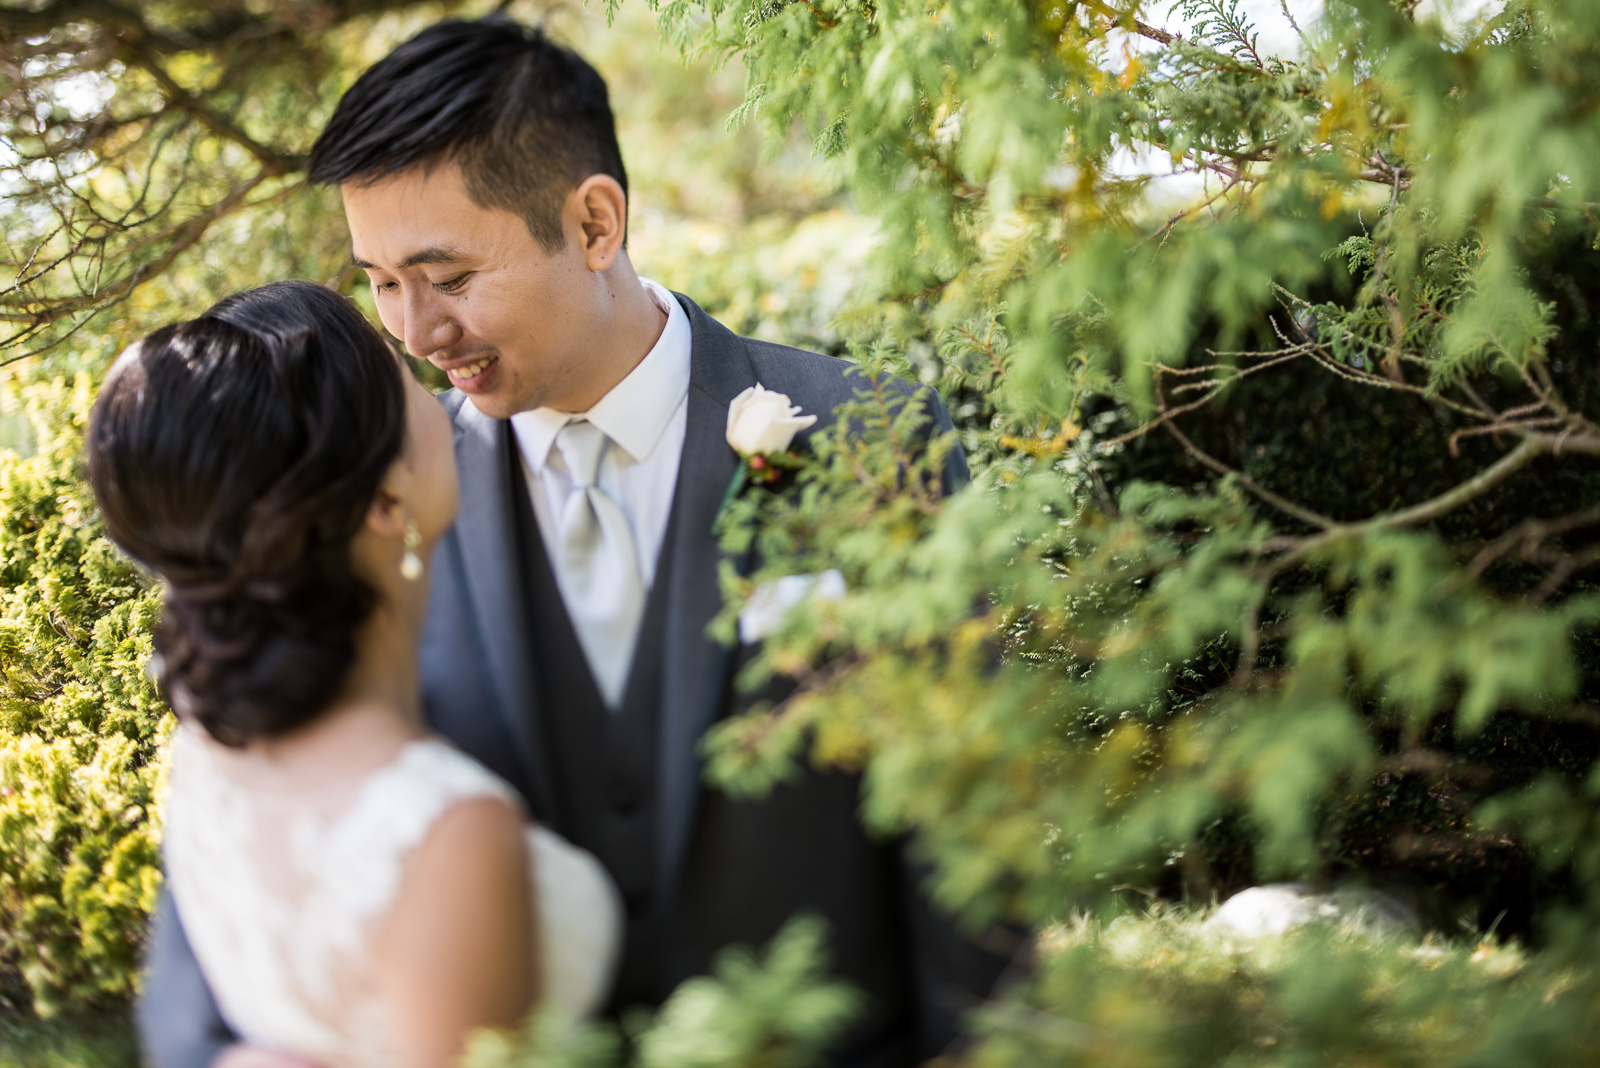 bride and groom portrait outdoors at cecil green park house on ubc campus in vancouver - victoria wedding photographers